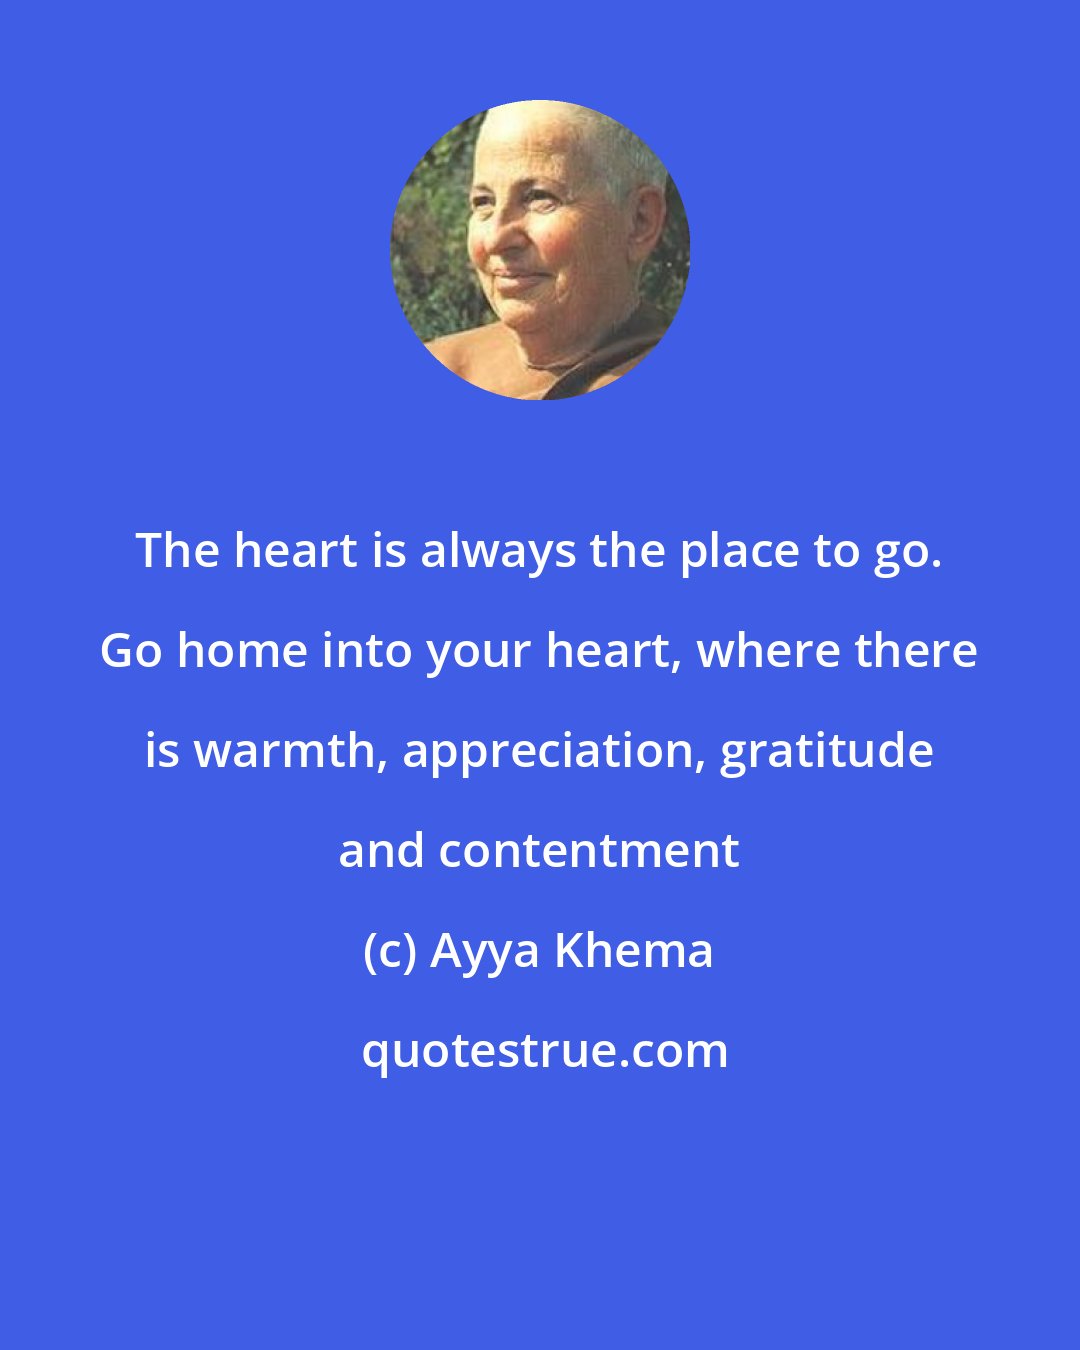 Ayya Khema: The heart is always the place to go. Go home into your heart, where there is warmth, appreciation, gratitude and contentment